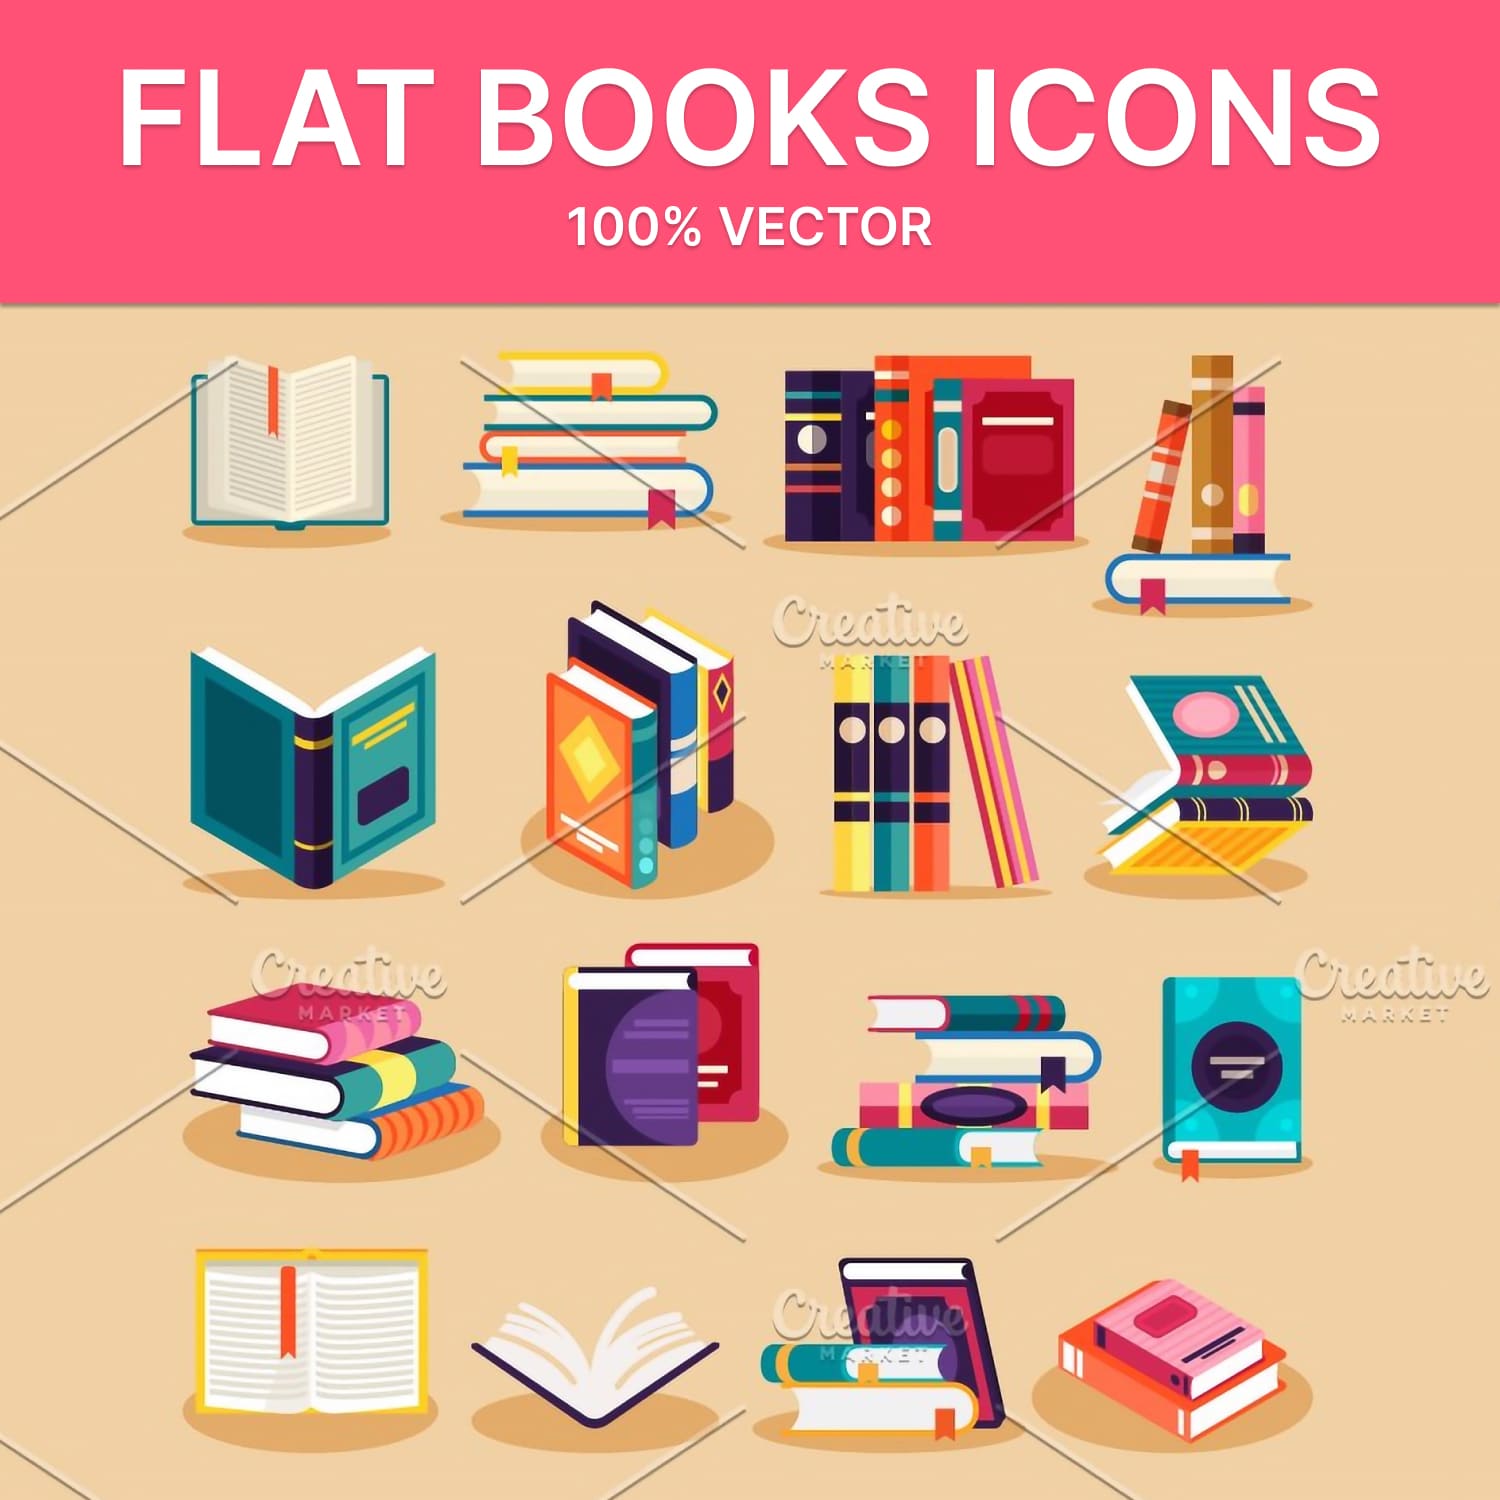 Flat books icons main cover.